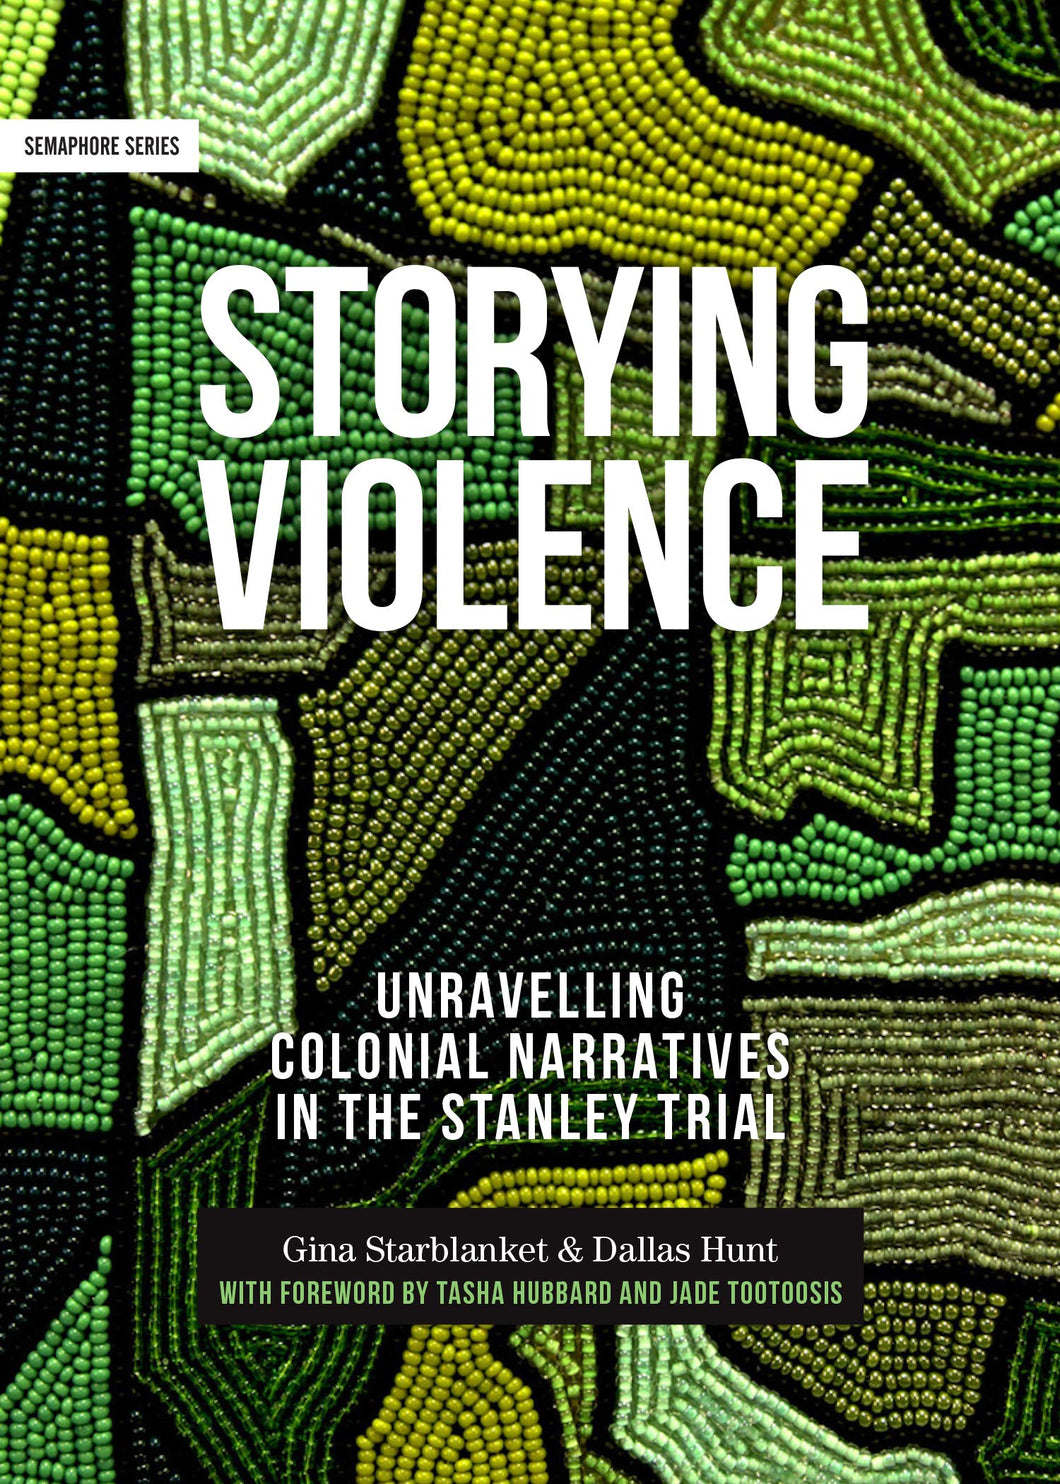 Storying Violence: Unravelling Colonial Narratives in the Stanley Trial [Gina Starblanket & Dallas Hunt]